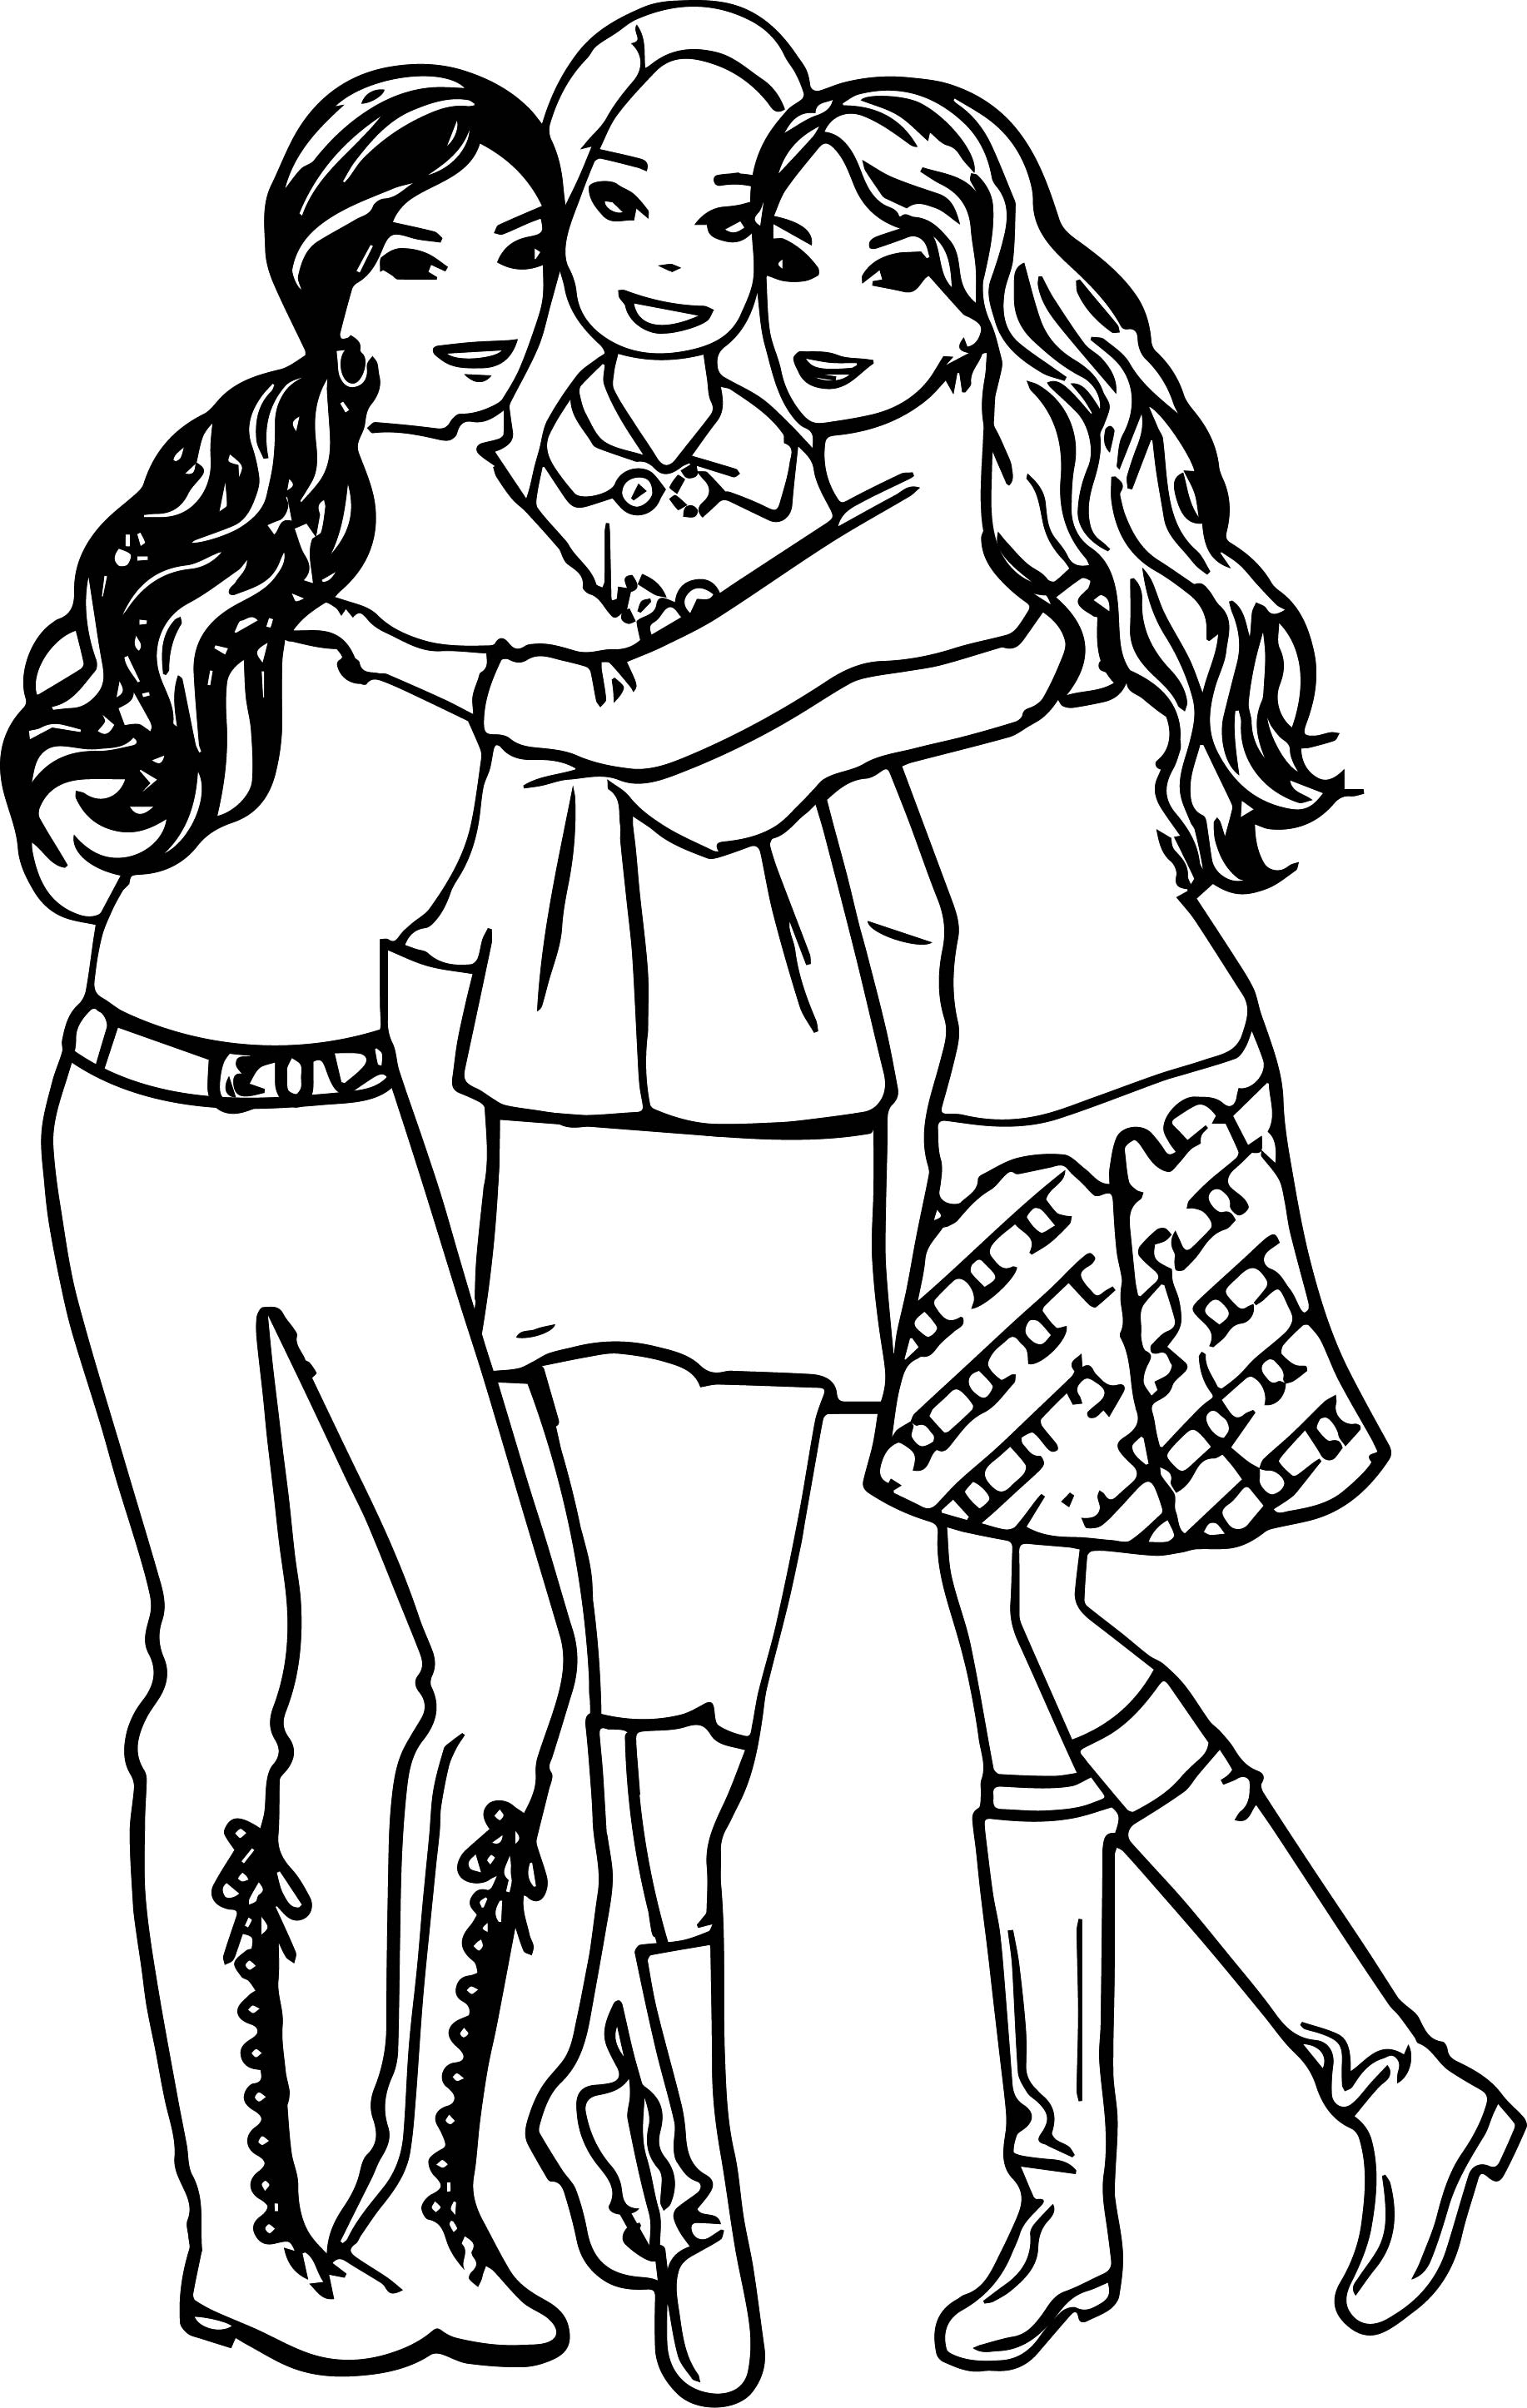 Coloring Pages Of 3 Girls - Map of world